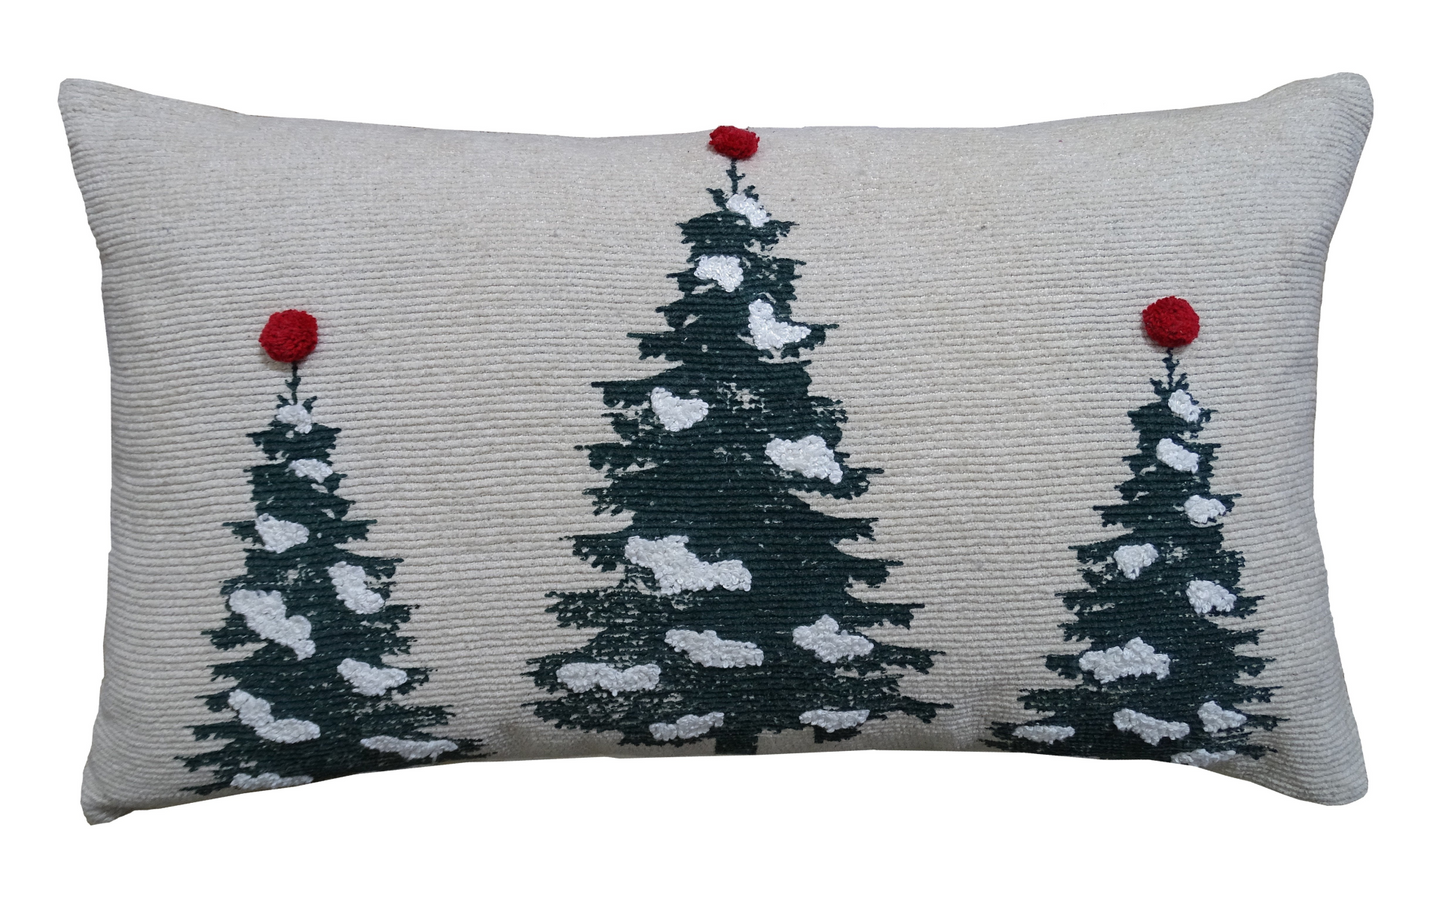 14" x 24" Christmas Throw Pillow for couch